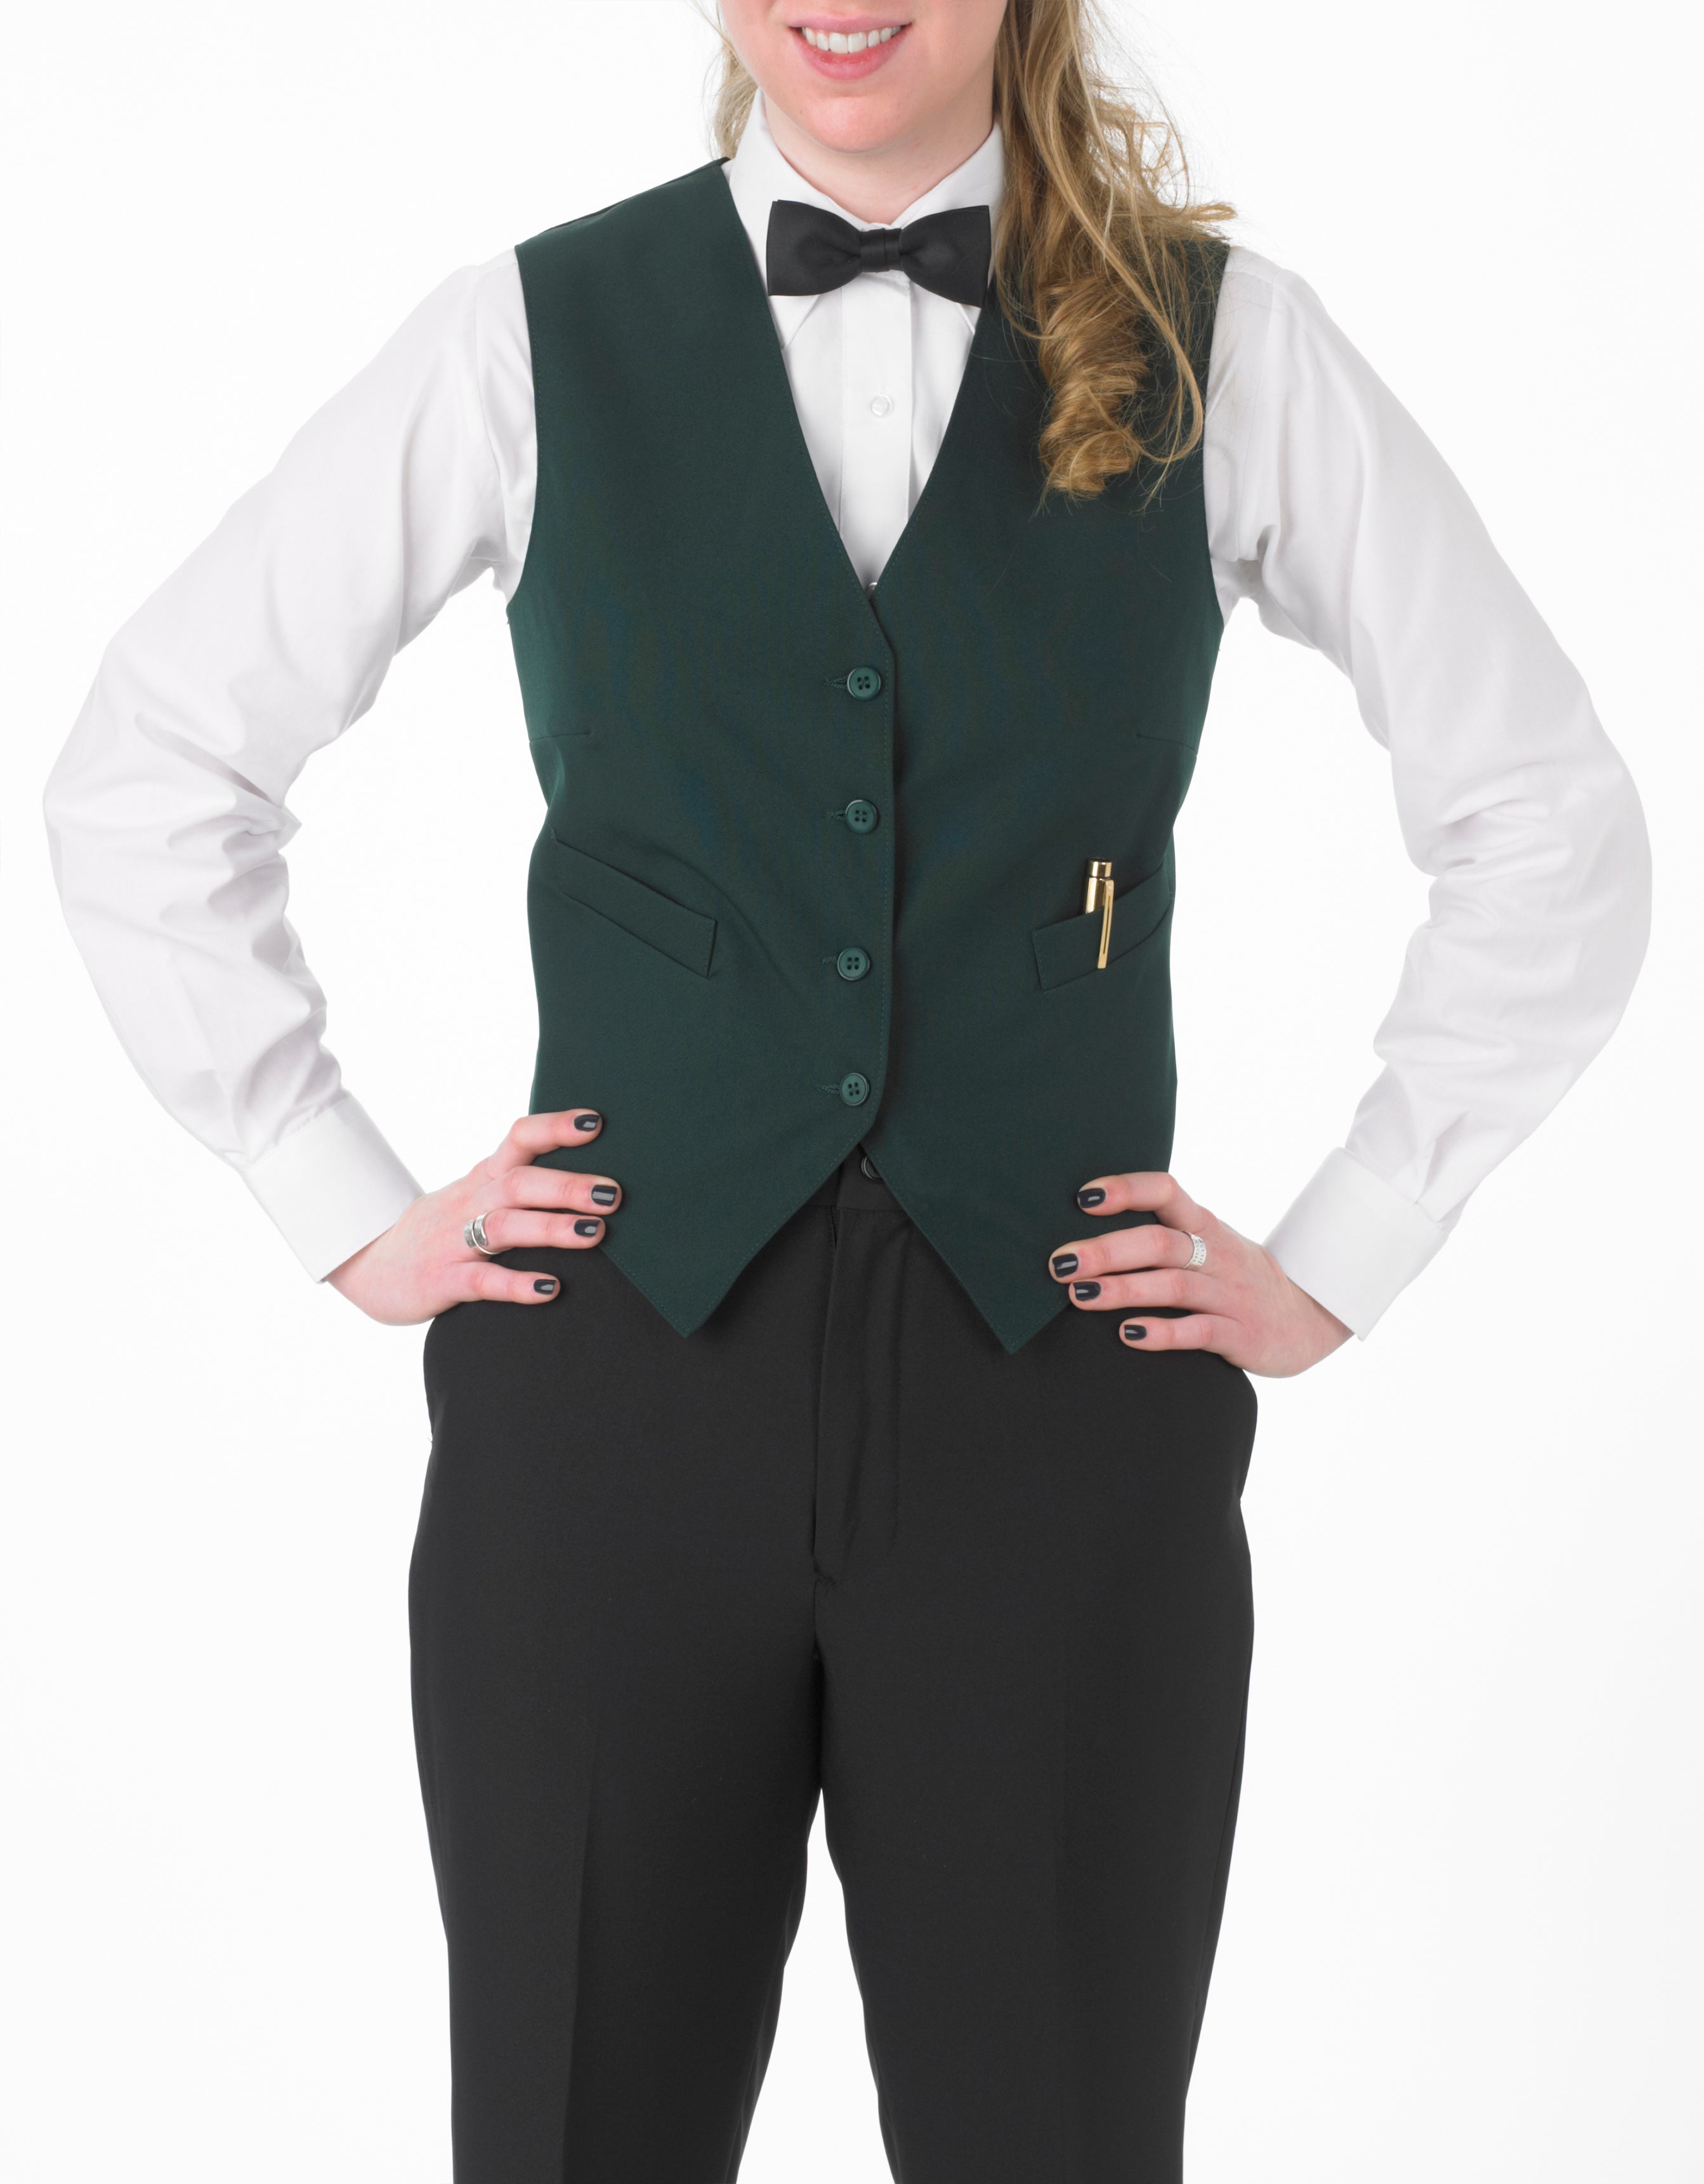 Women's Full Back Vest with Inside and Outside Pockets - 99tux